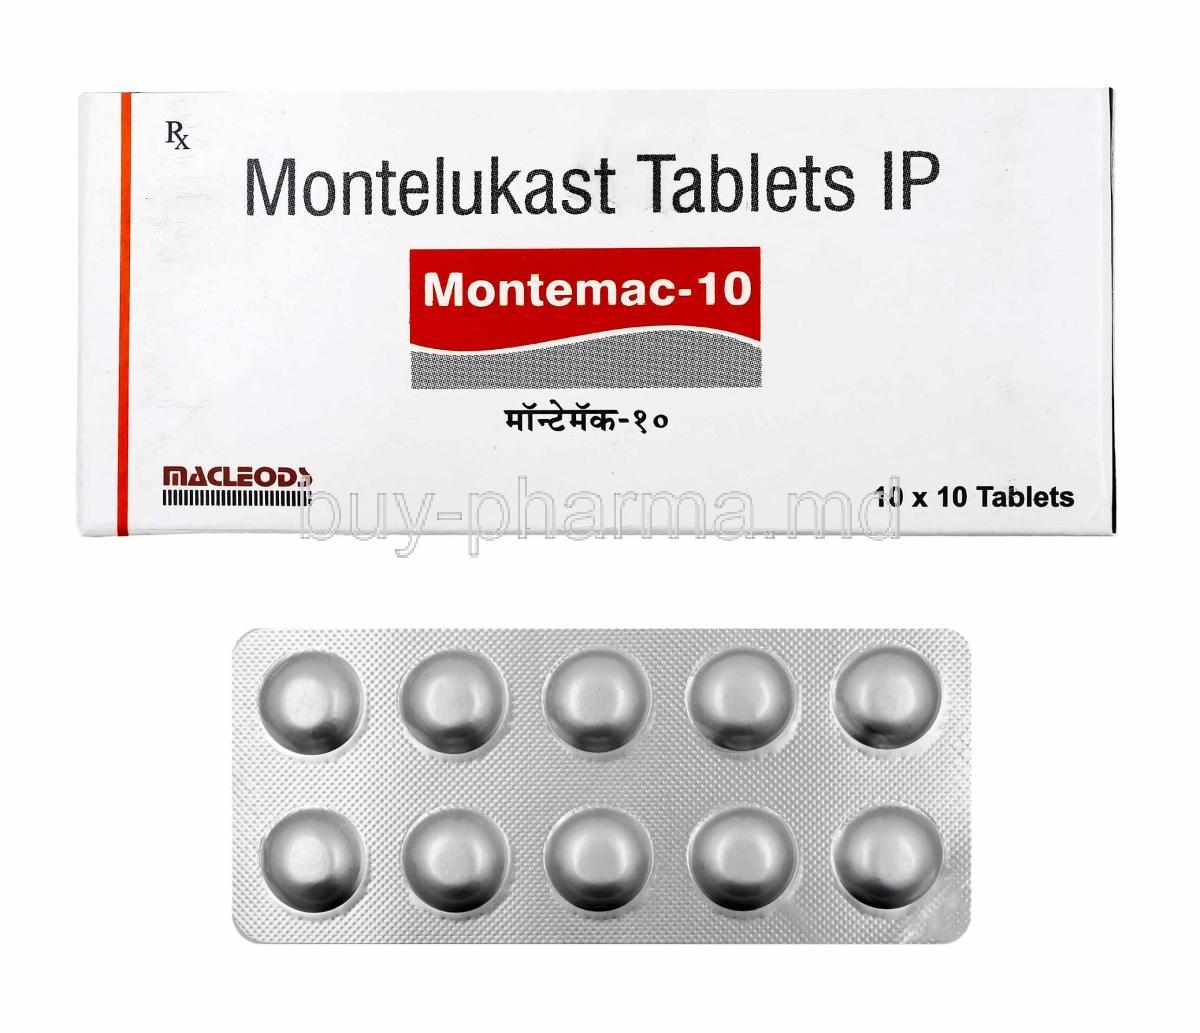 Montemac, Montelukast box and tablets